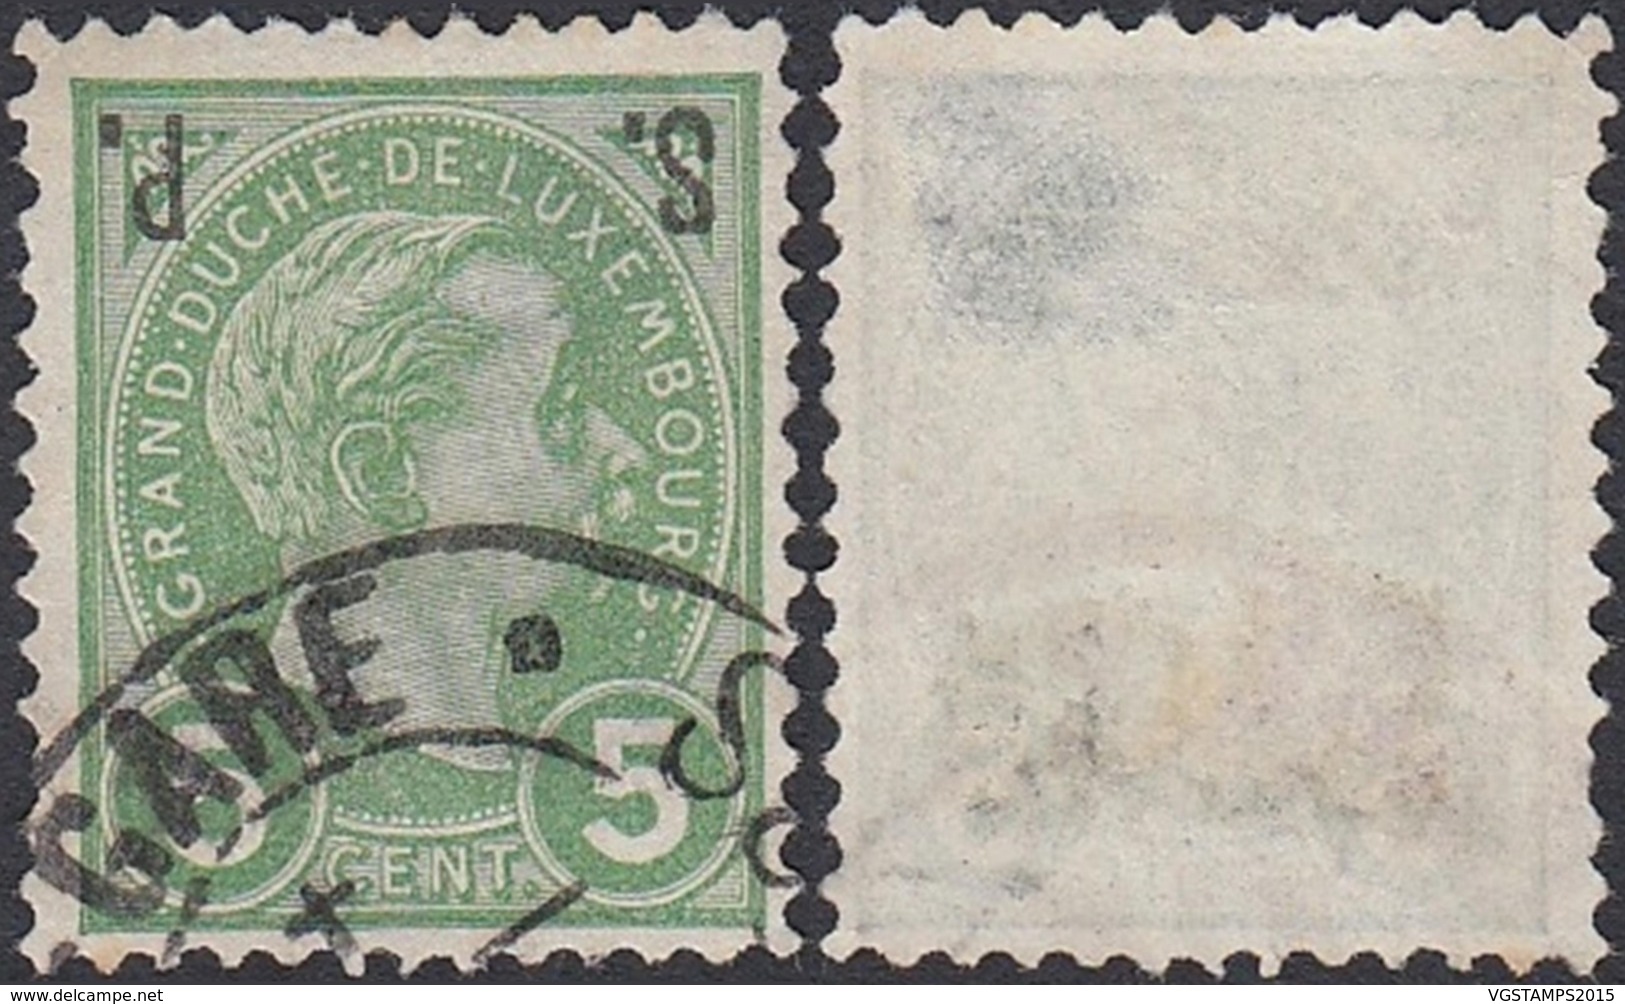 LUXEMBOURG SERVICE PRIFIX 80a SURCHARGE RENVERSEE PETIT DEFAUT RR (BE) DC-3727 - 1895 Adolphe Right-hand Side